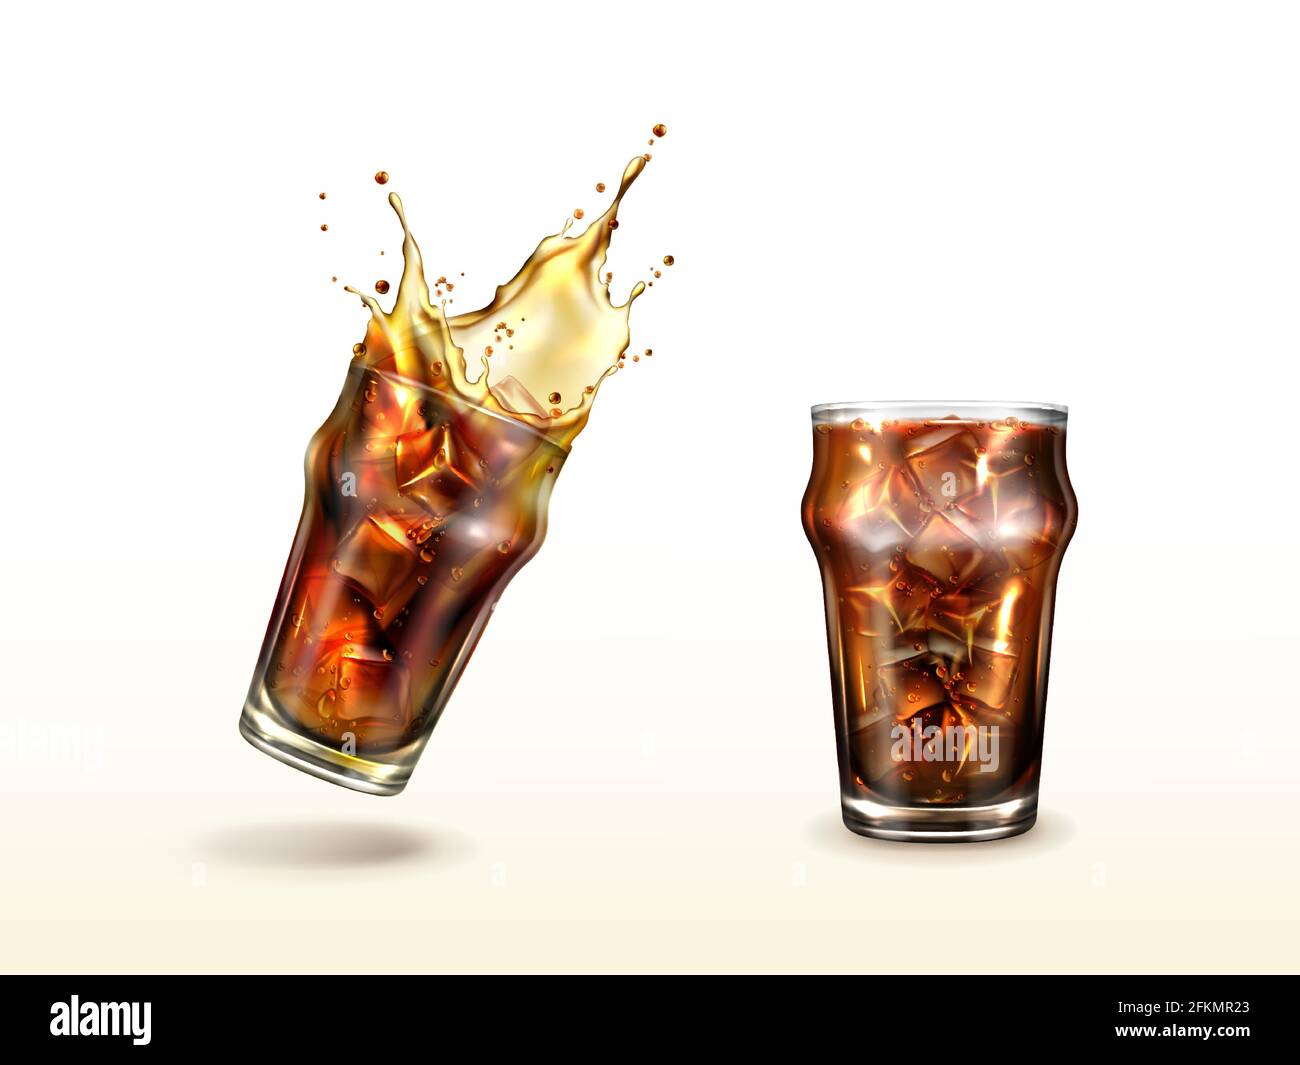 https://c8.alamy.com/comp/2FKMR23/splash-cola-soda-cold-tea-or-coffee-with-ice-cubes-splashing-drink-in-glass-cup-with-air-bubbles-isolated-summer-cocktail-or-whiskey-alcohol-beverage-realistic-3d-vector-illustration-clip-art-2FKMR23.jpg